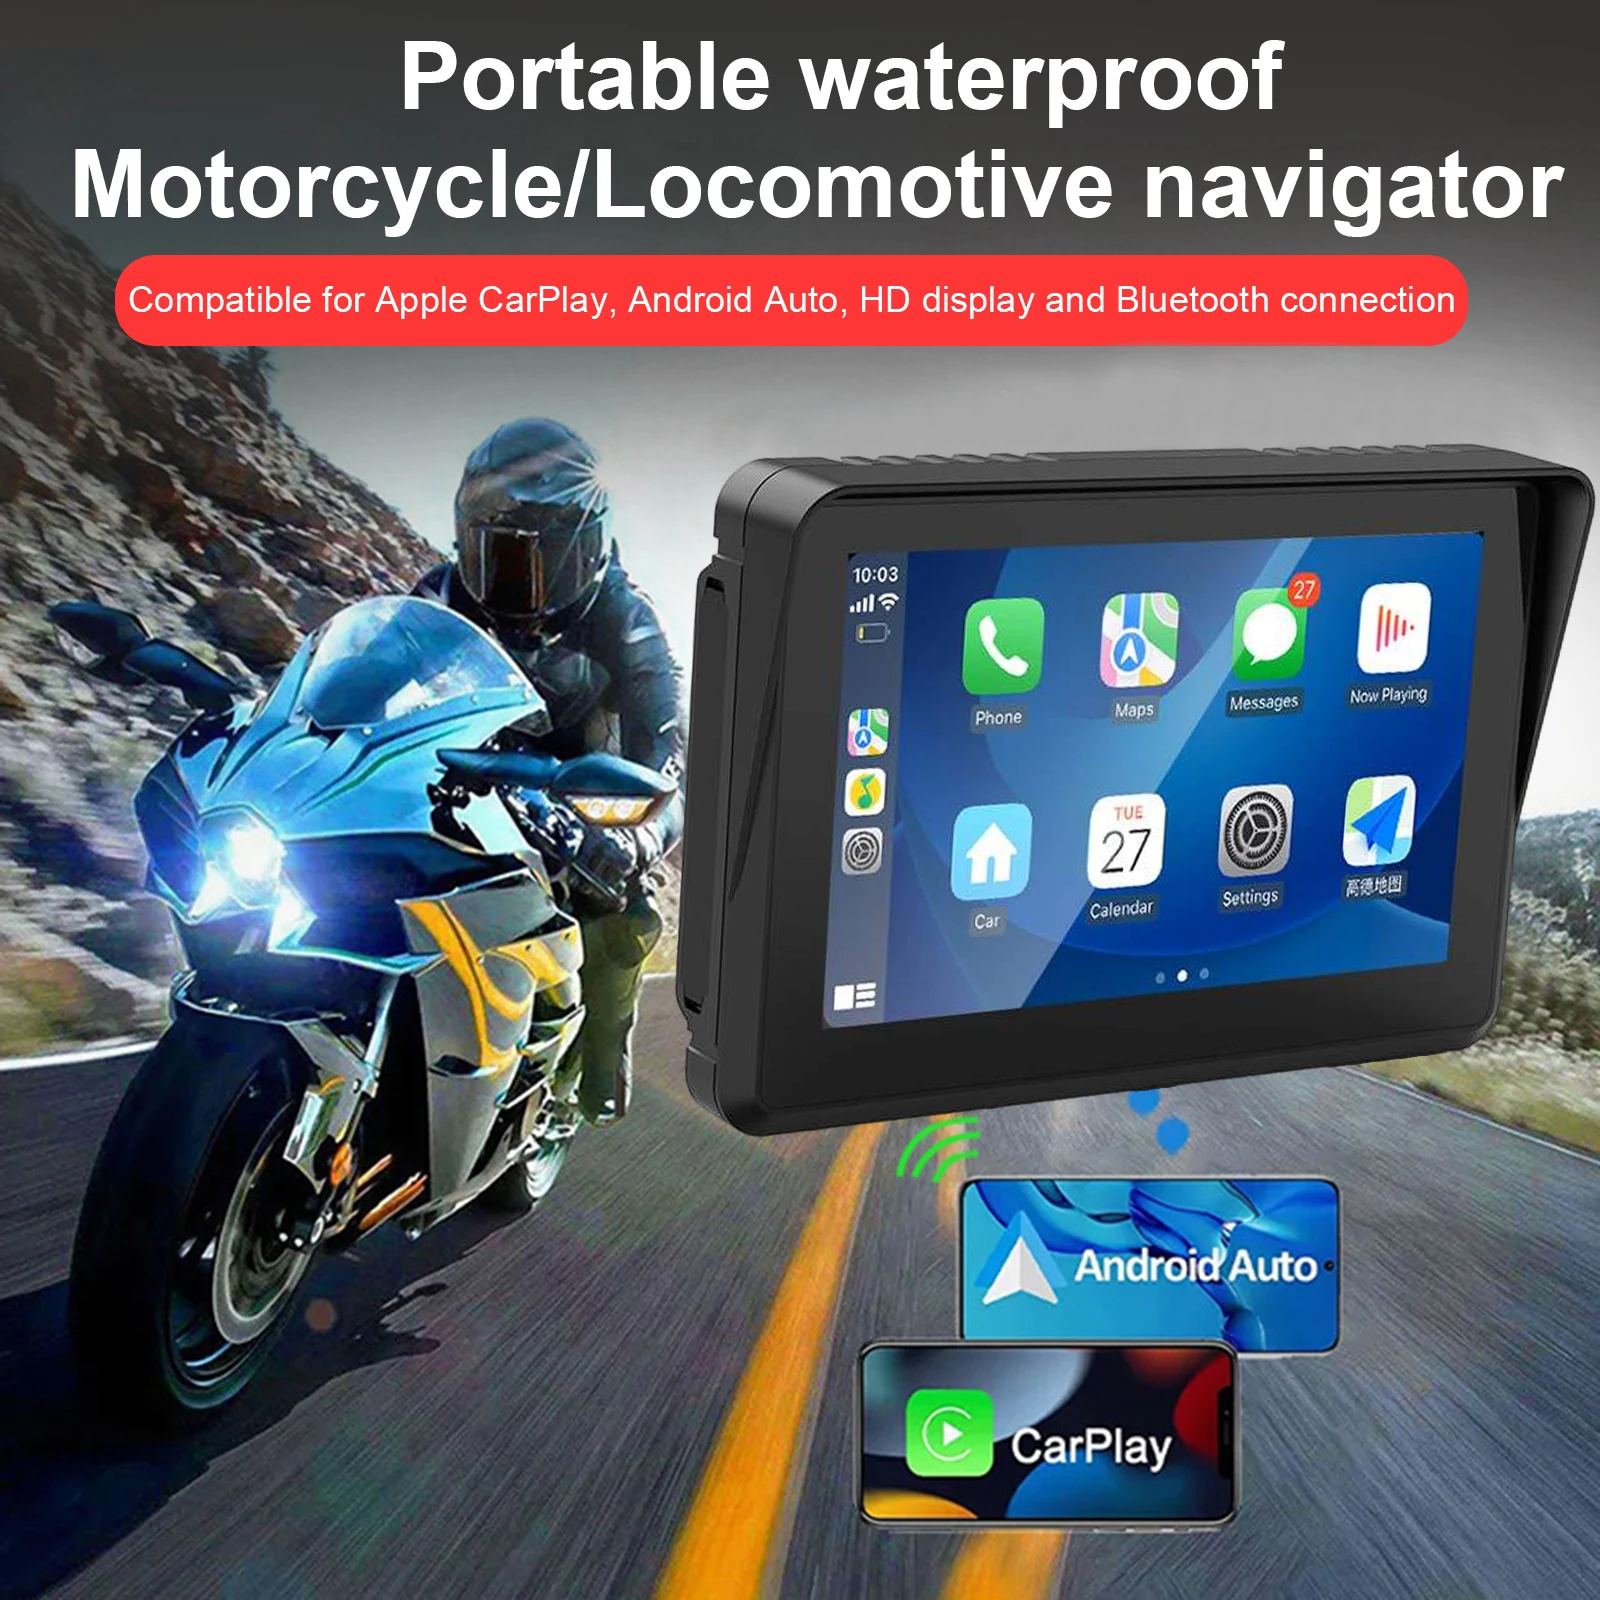 

5 Inch Touch Motorcycle GPS Navigator Wireless CarPlay And Android Auto IPX7 Waterproof External Moto Navigator